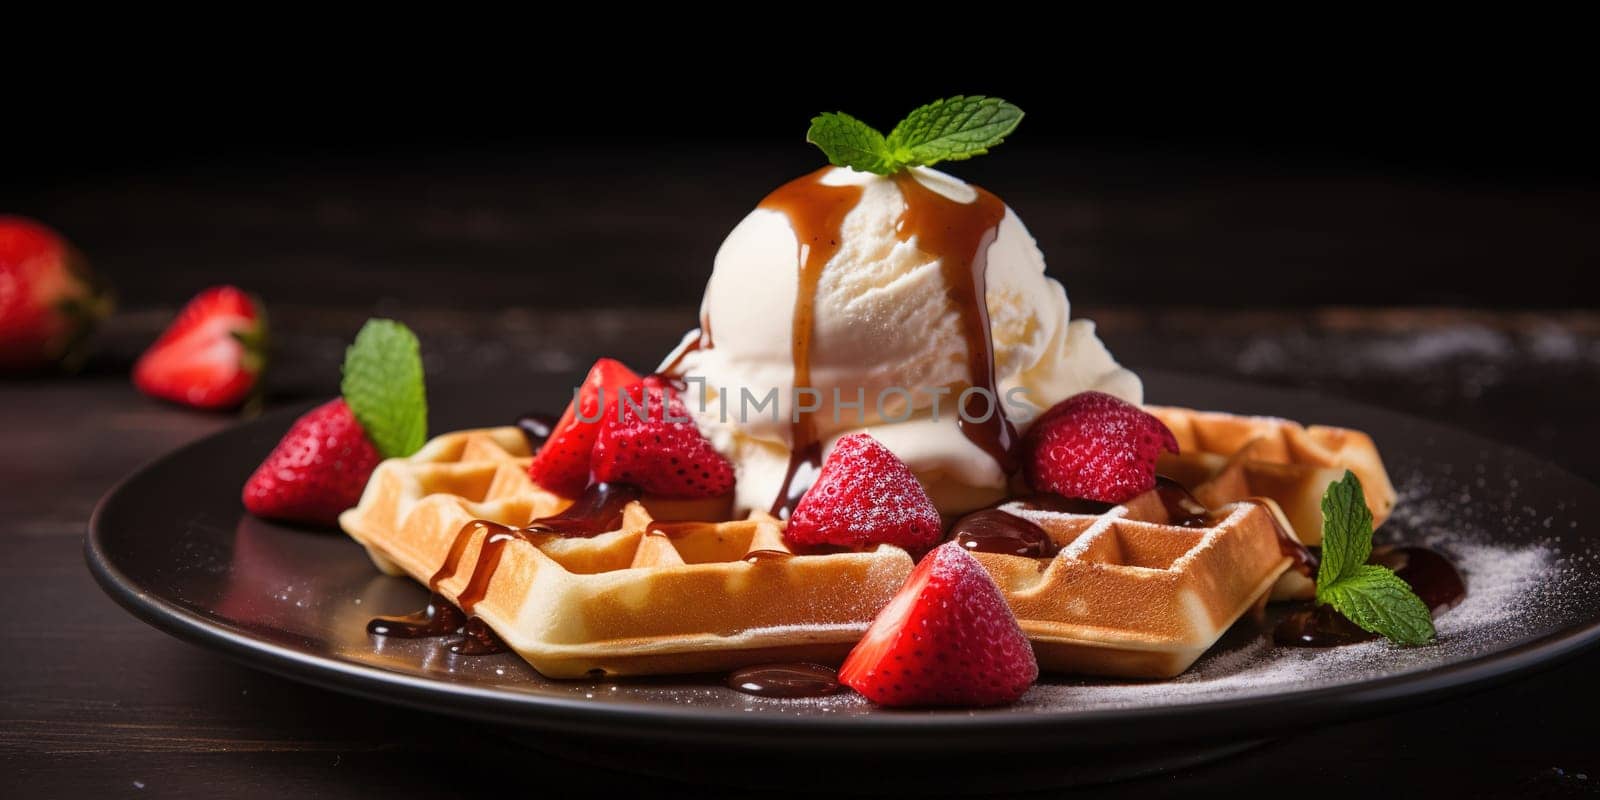 Delicious Waffle Dessert With Strawberries And Cream On A Plate by tan4ikk1